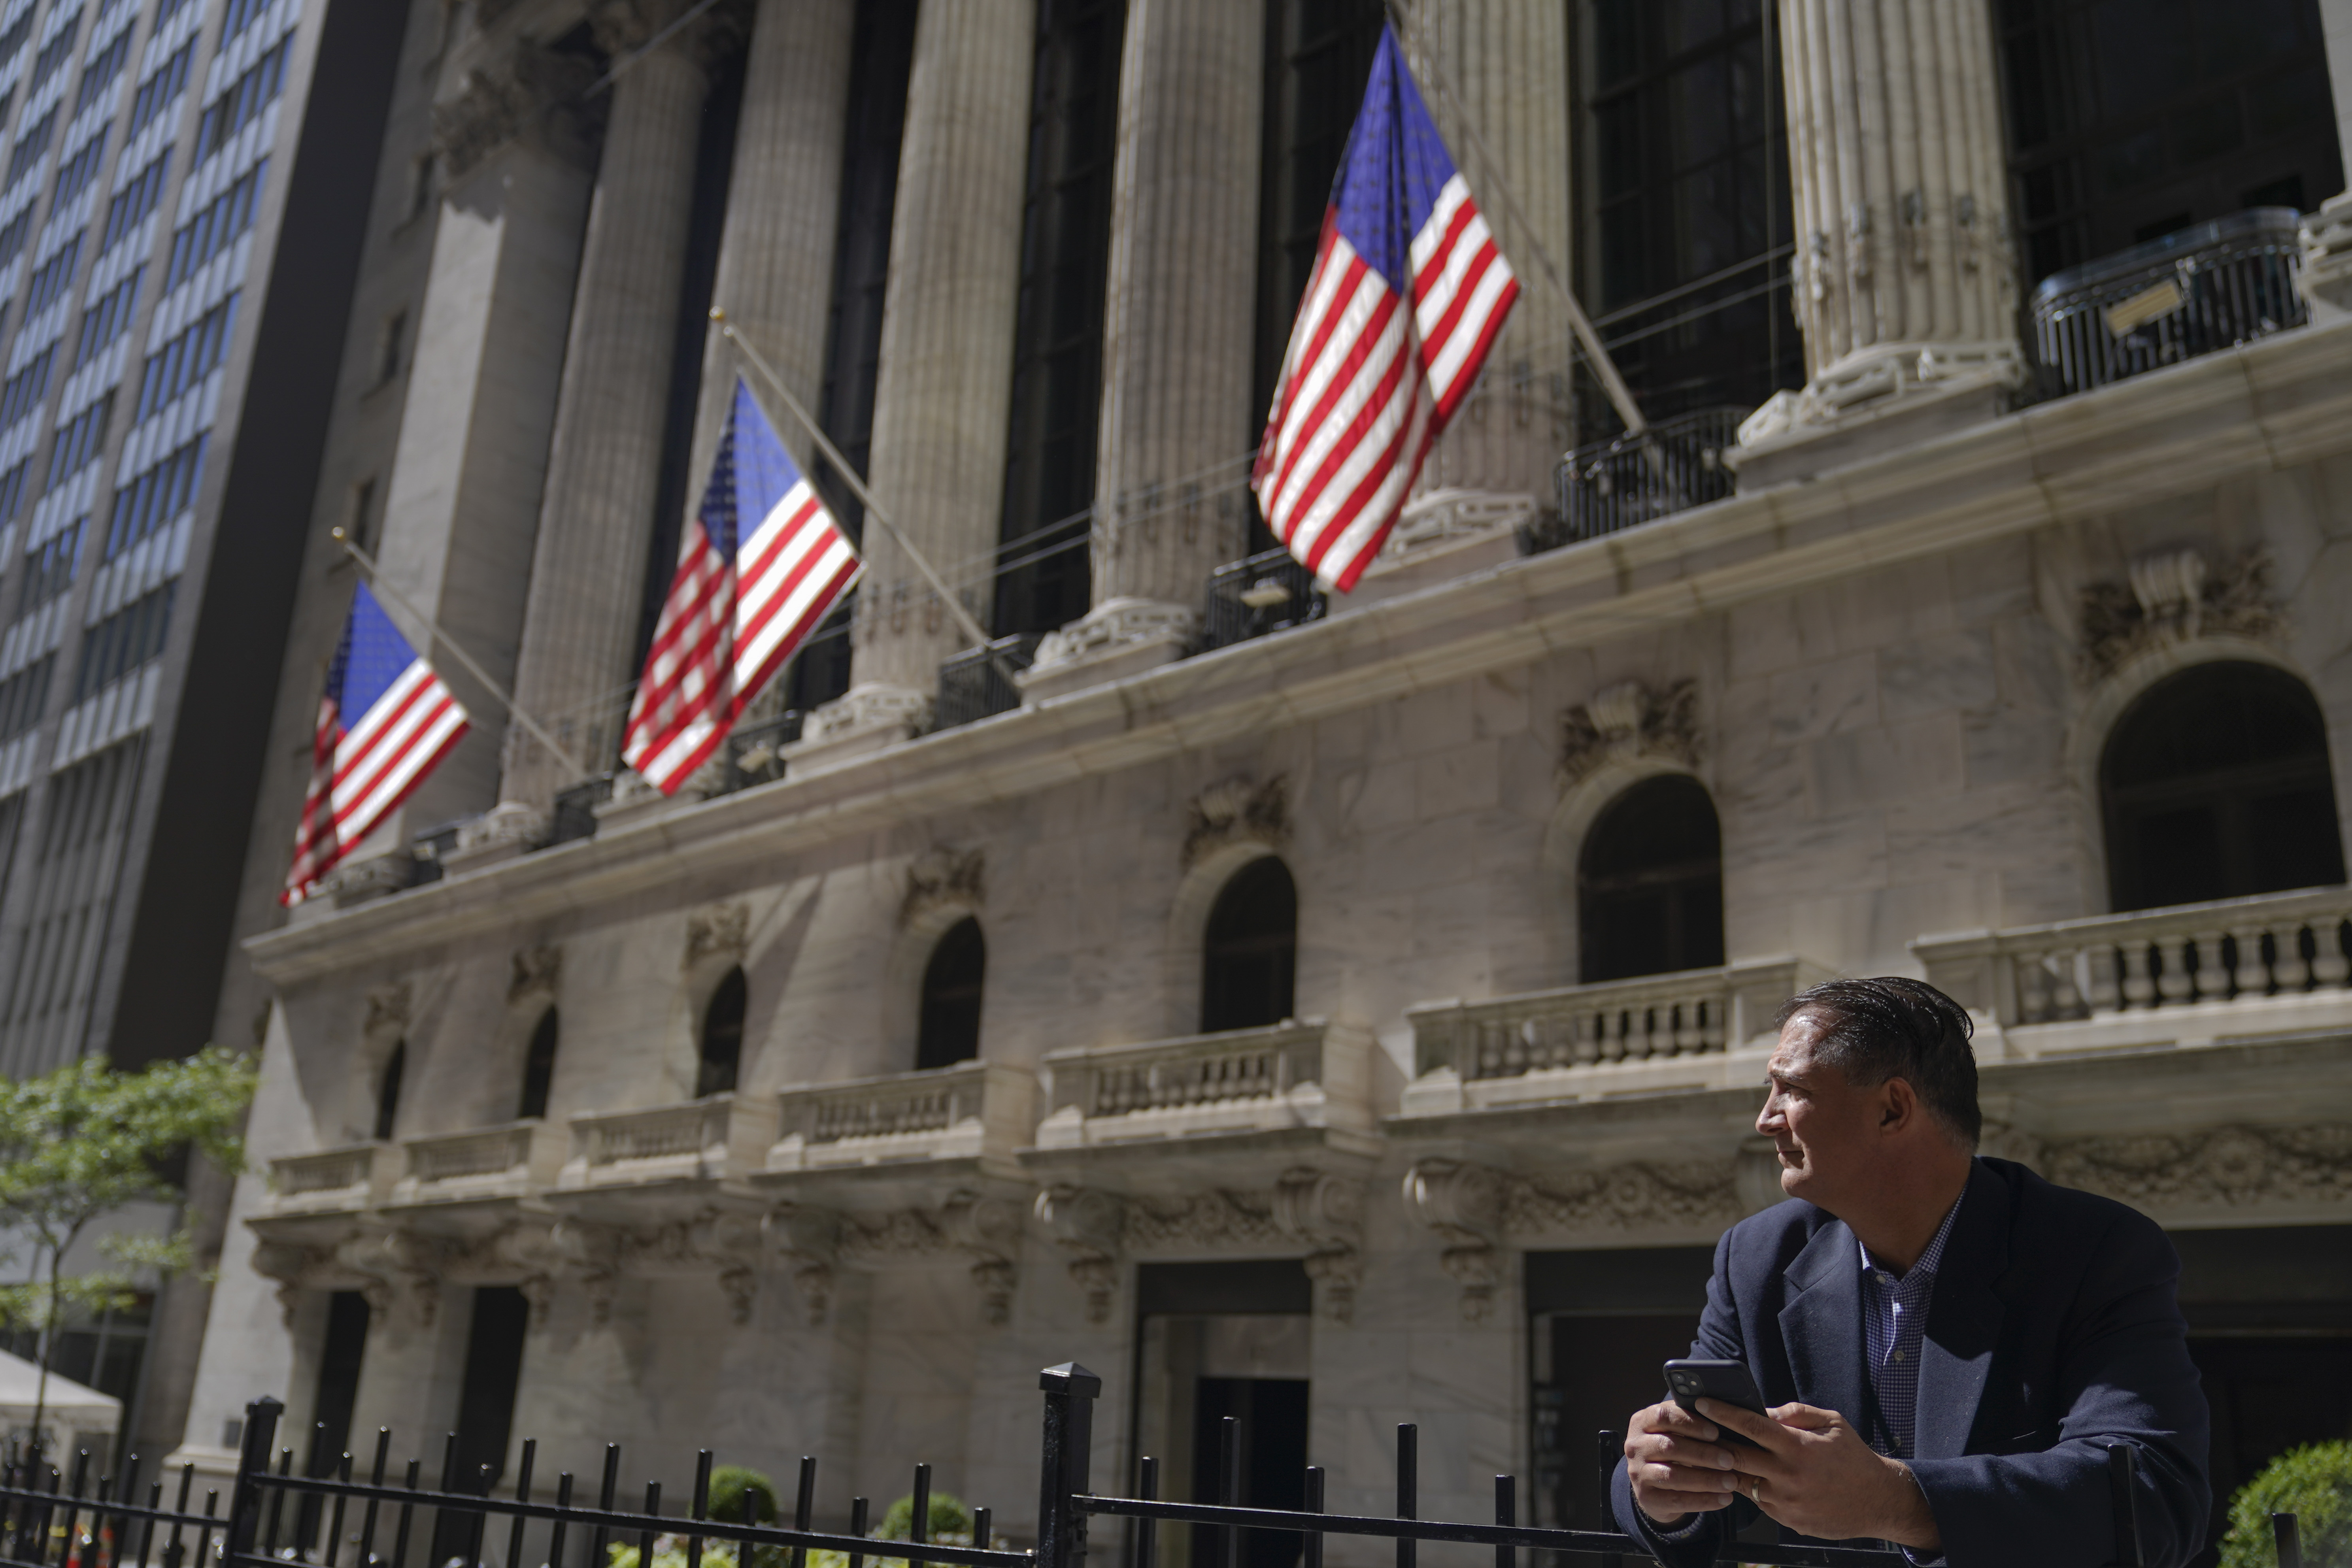 A man uses his cell phone outside the New York Stock Exchange.  (AP Photo/Mary Altaffer)